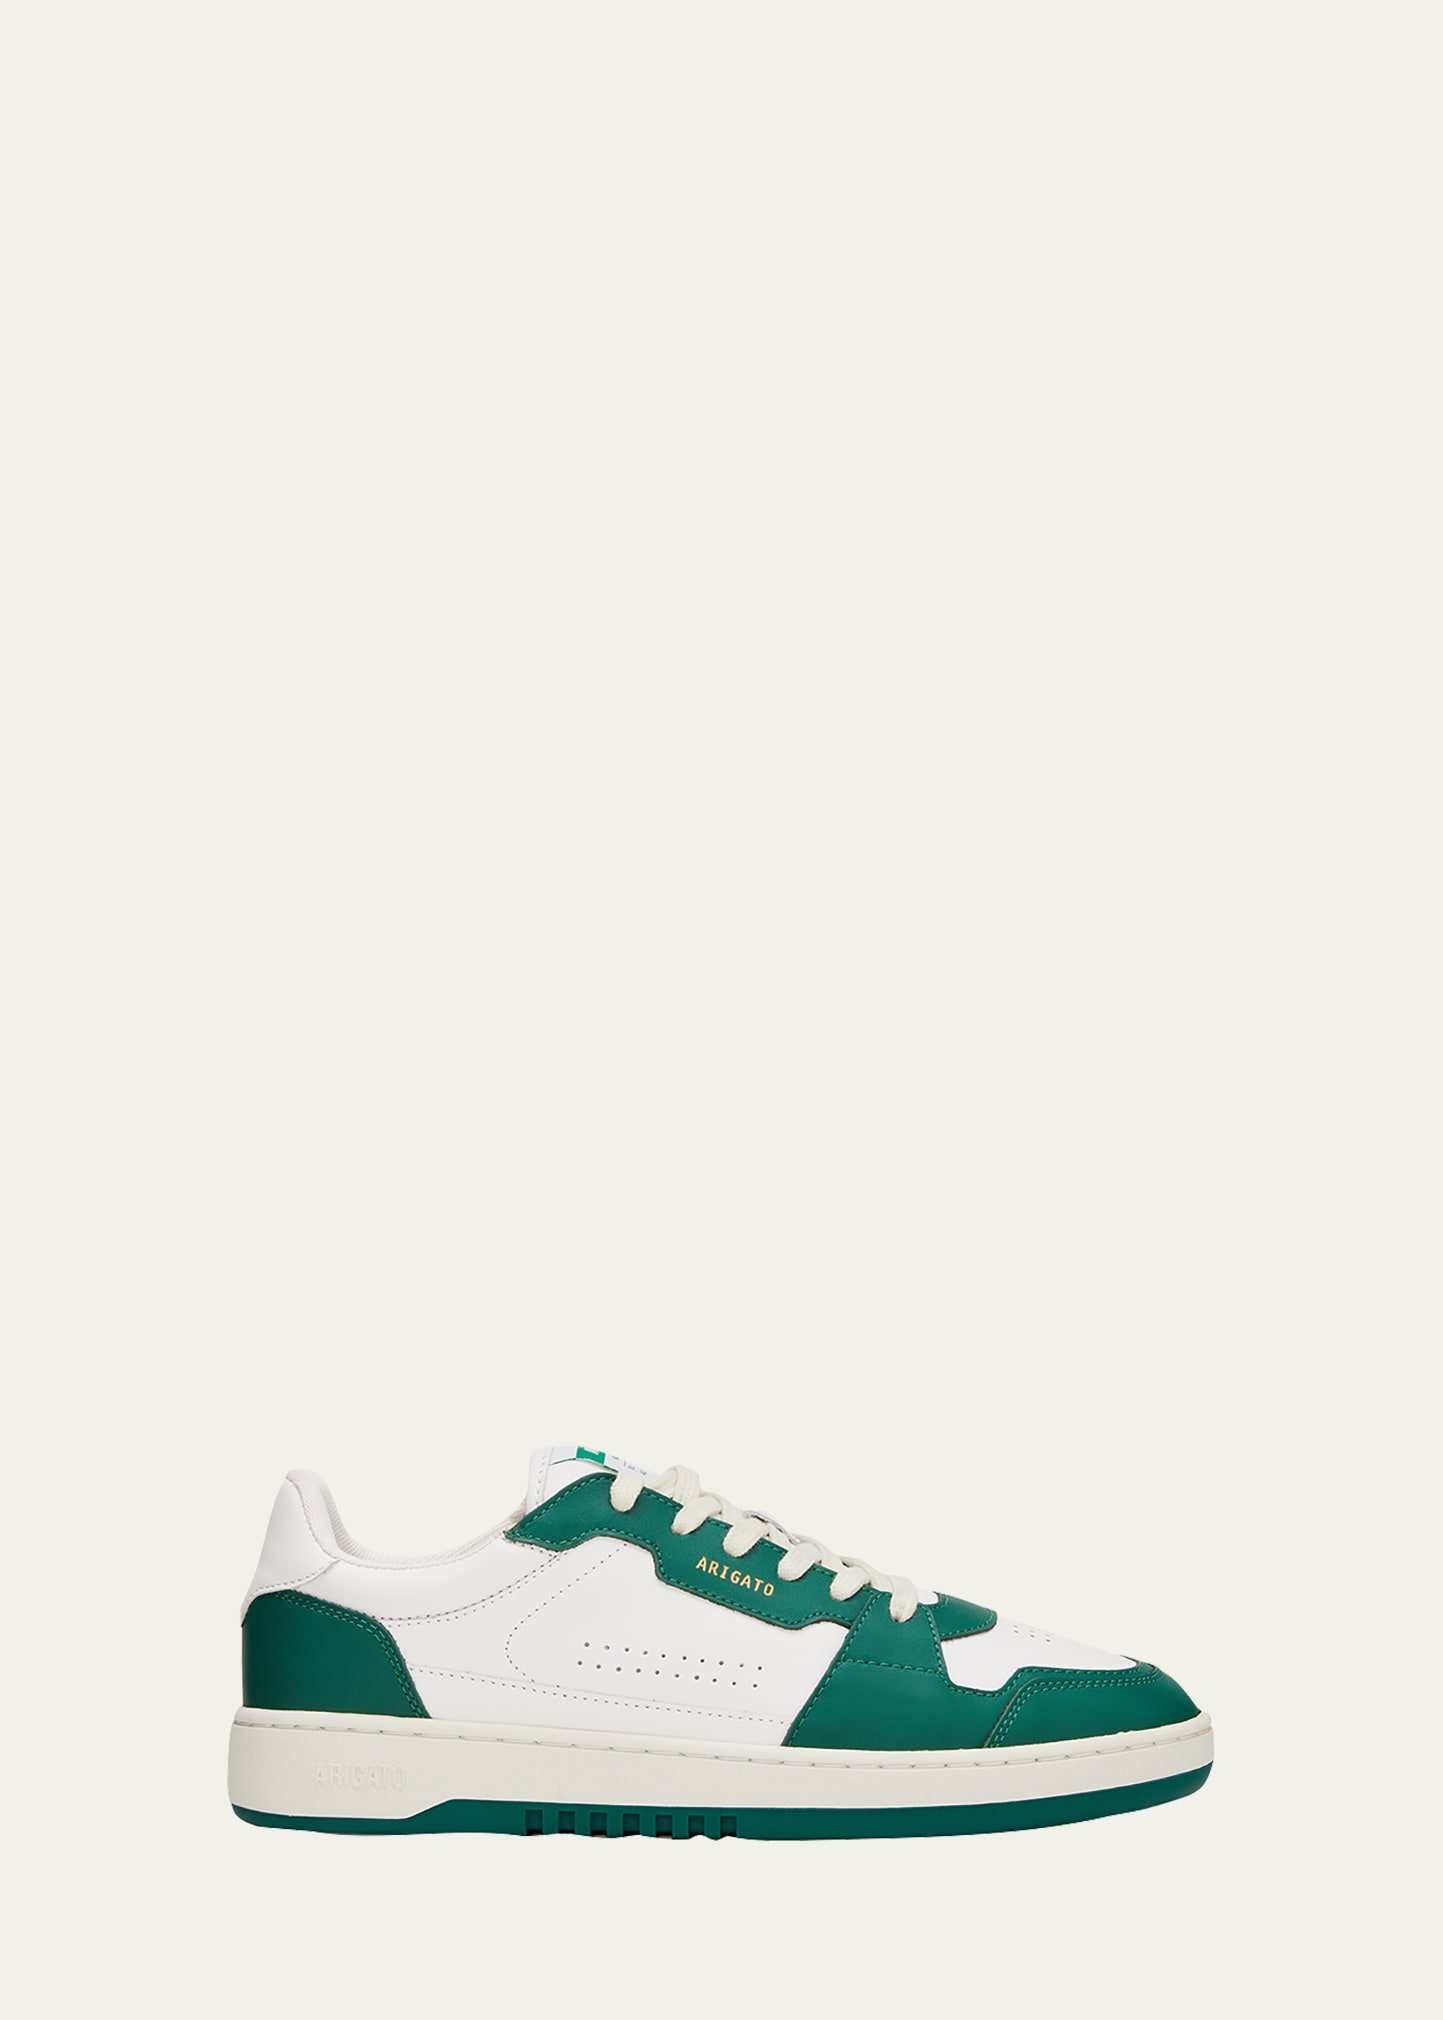 Shop Axel Arigato Men's Dice Lo Leather Sneakers In White Green